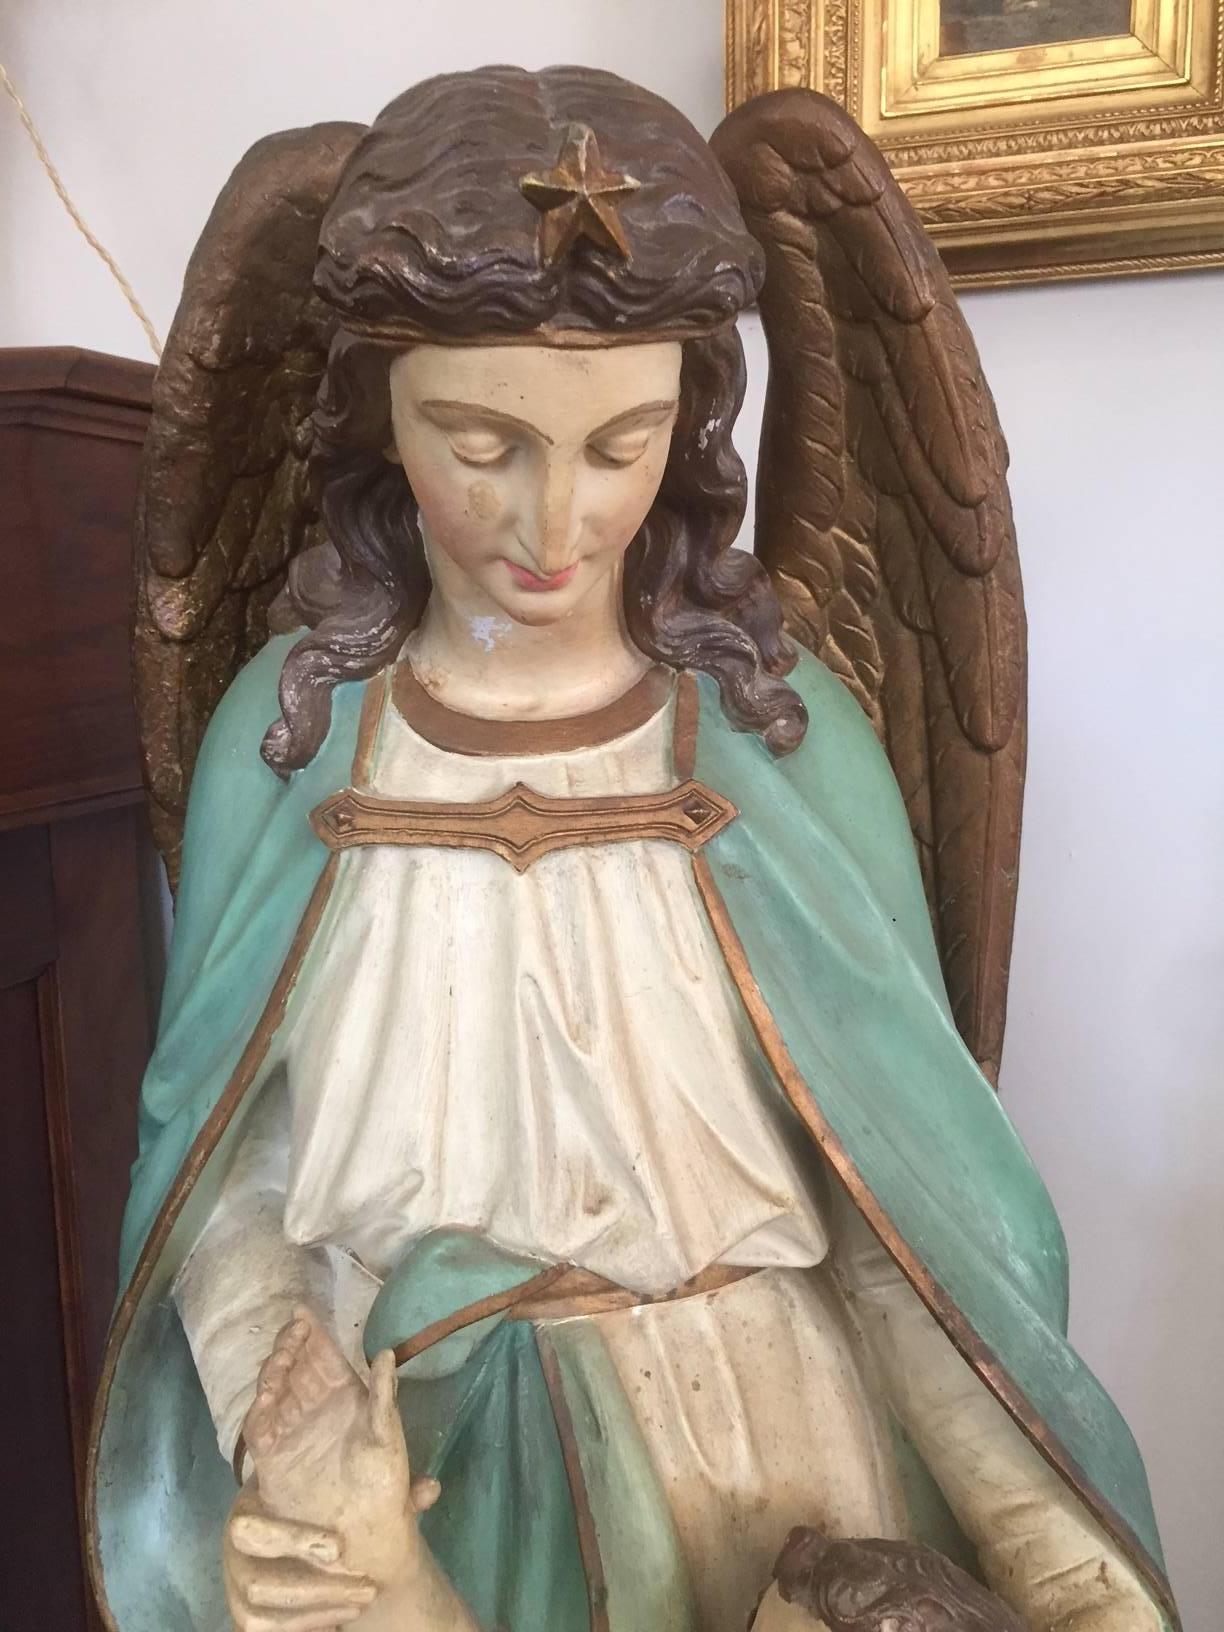 Early 20th century Religious white terracotta Gabriel angel statue from a church.
Angel Gabriel with his wings protecting a child.
Painted terracotta.
Original patina.